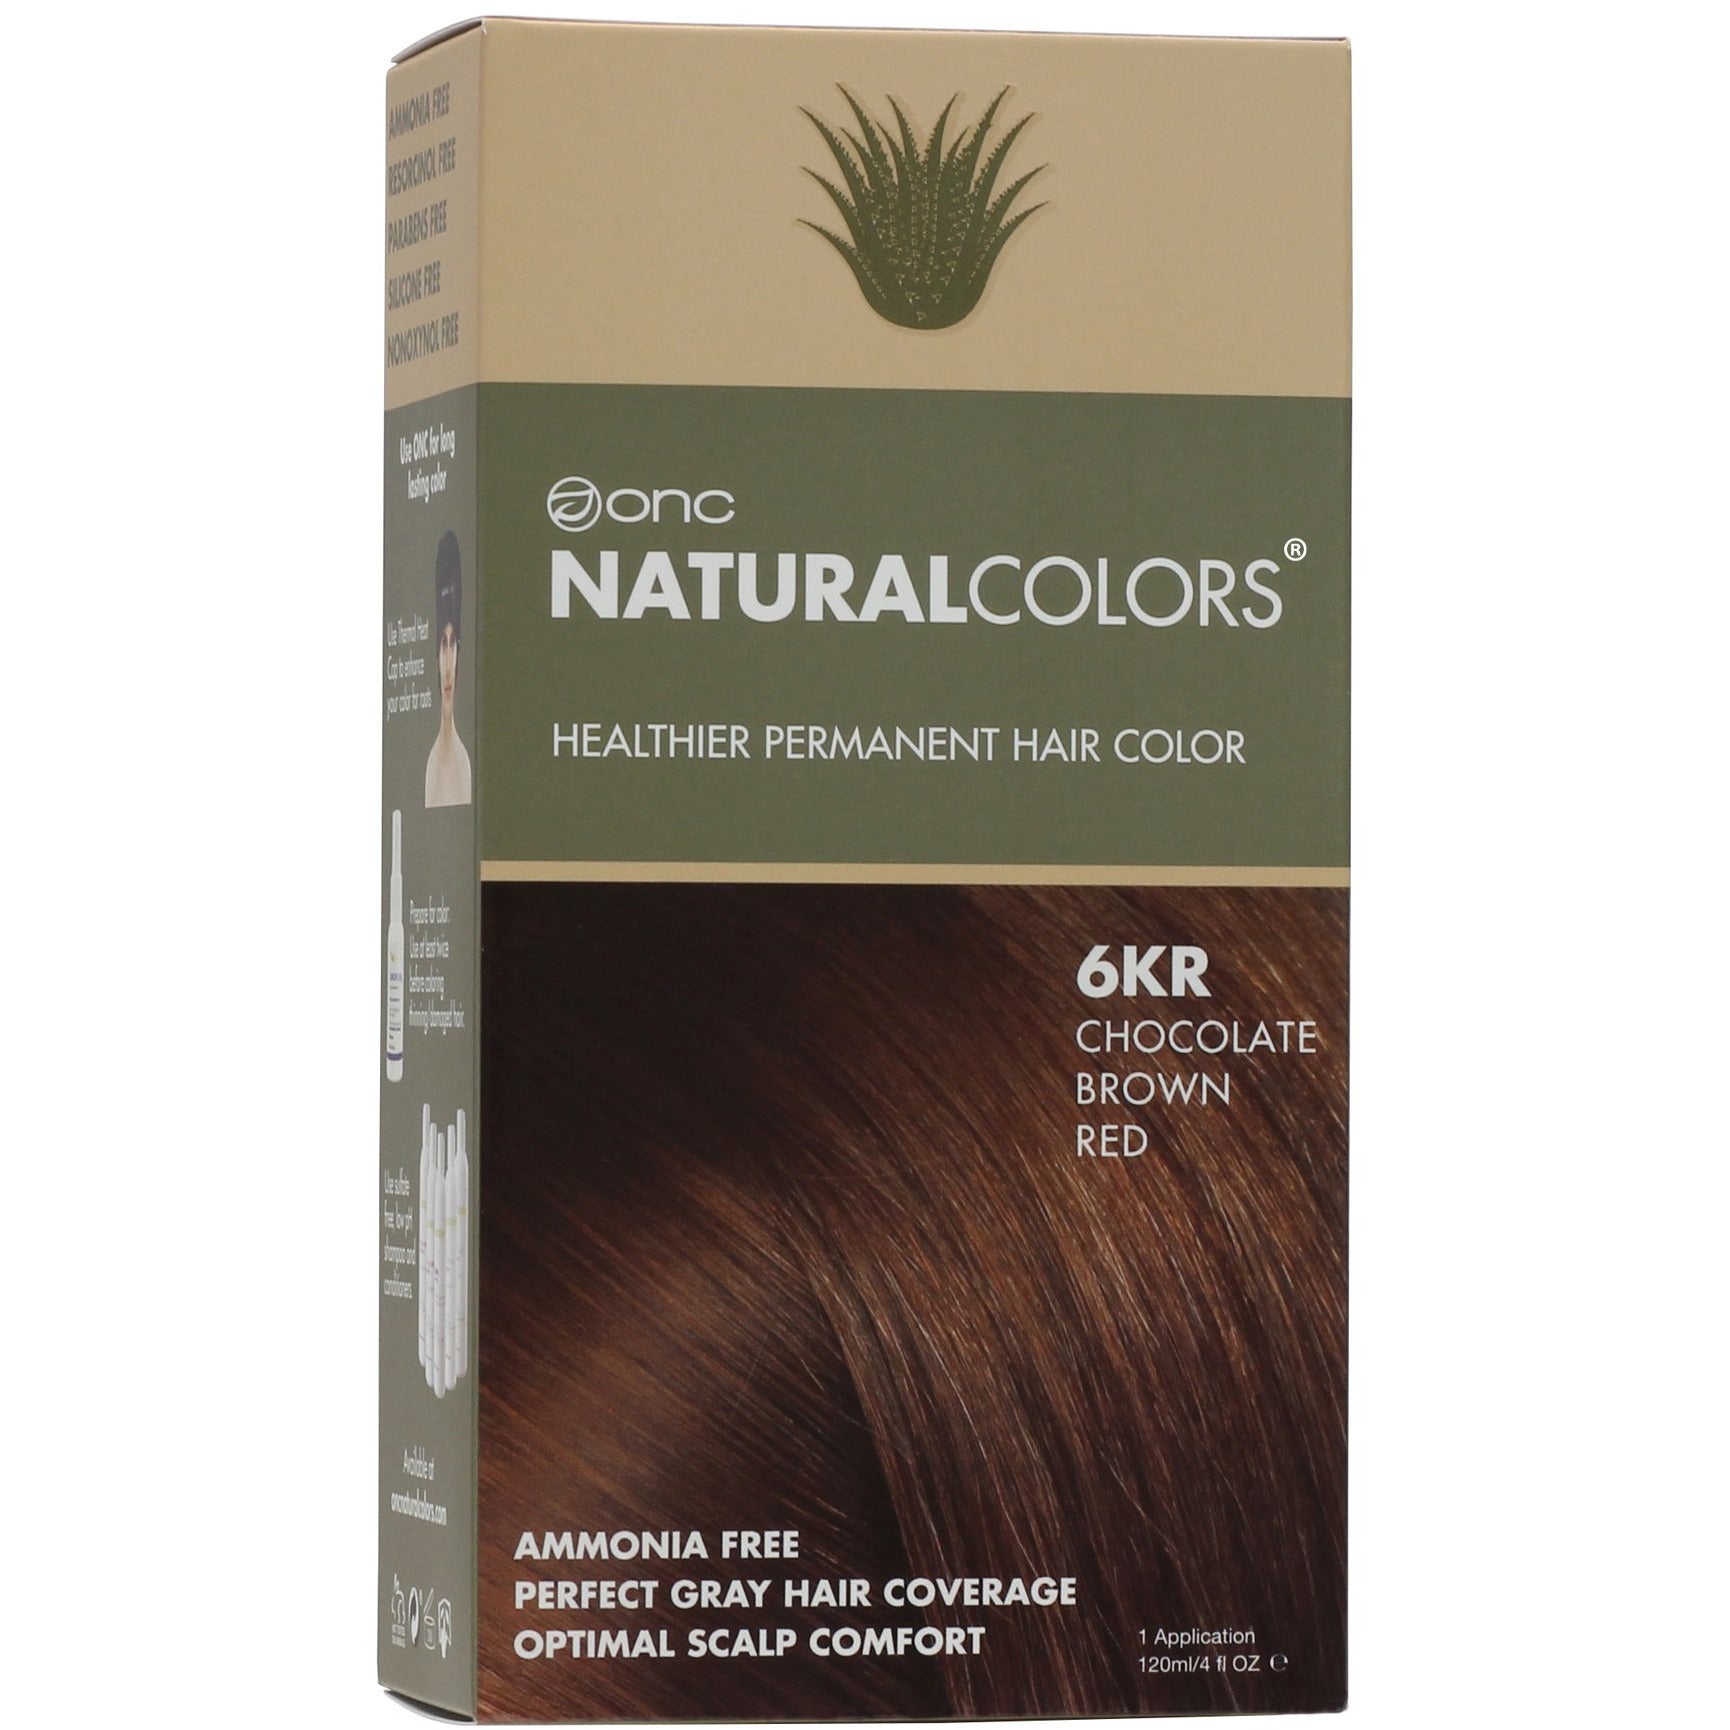 6KR Chocolate Brown Red Heat Activated Hair Dye With Organic Ingredients - 120 ml (4 fl. oz)